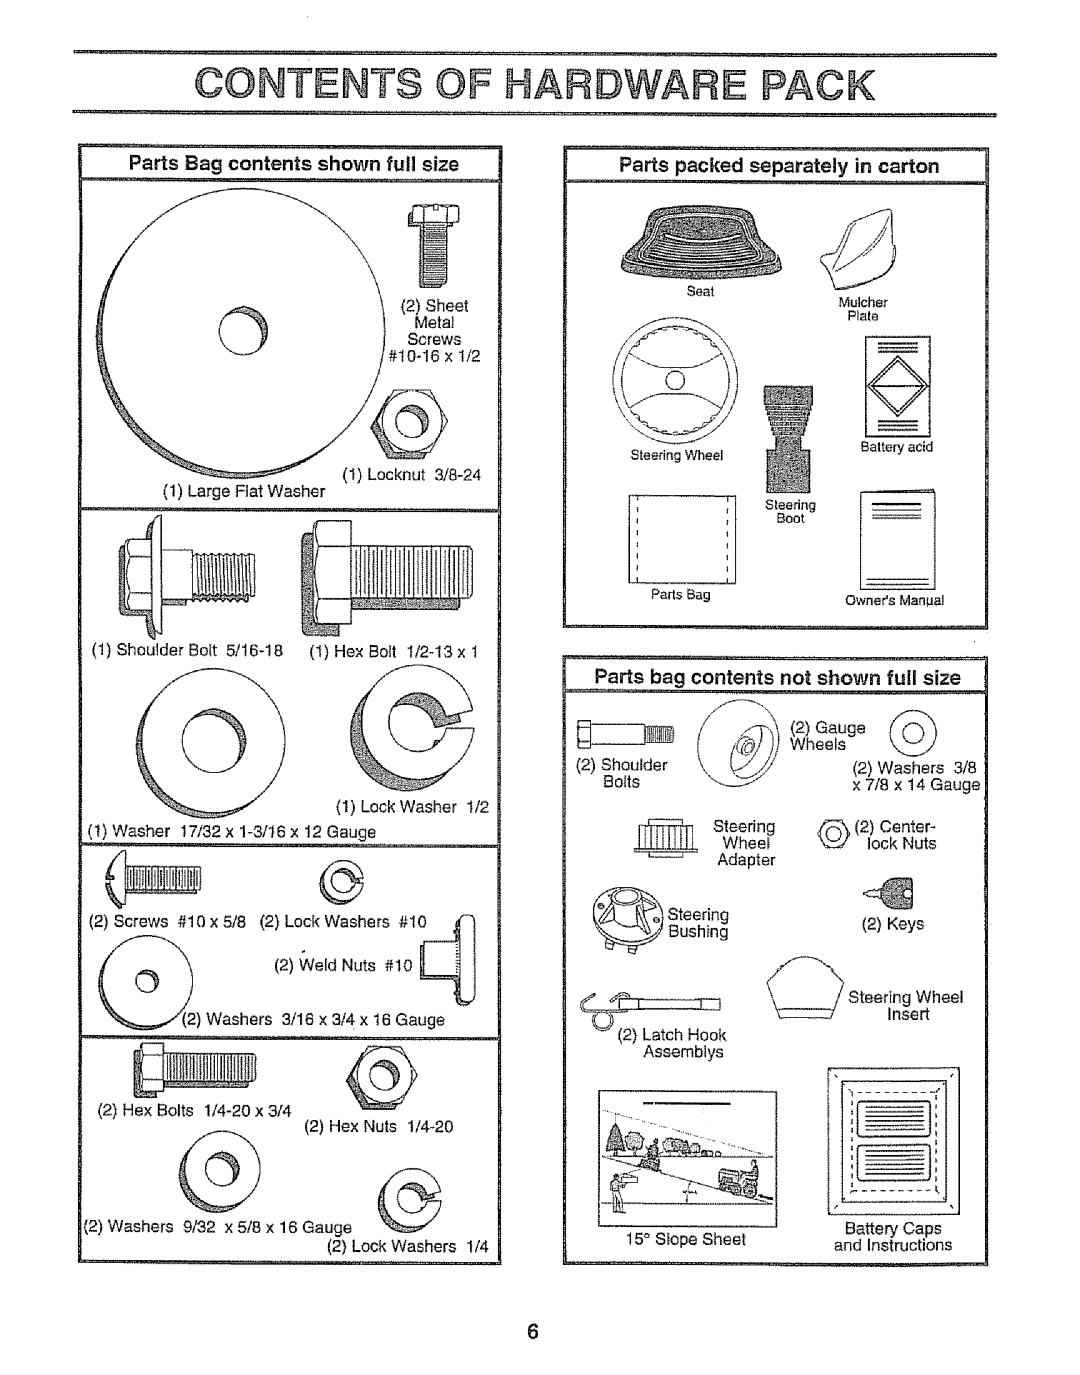 Craftsman 917.252560 Contents, Of Hardware, Pack, _-_ <2Ve,dNuts1o, Parts bag contents not shown full size, Gauge, Wheels 